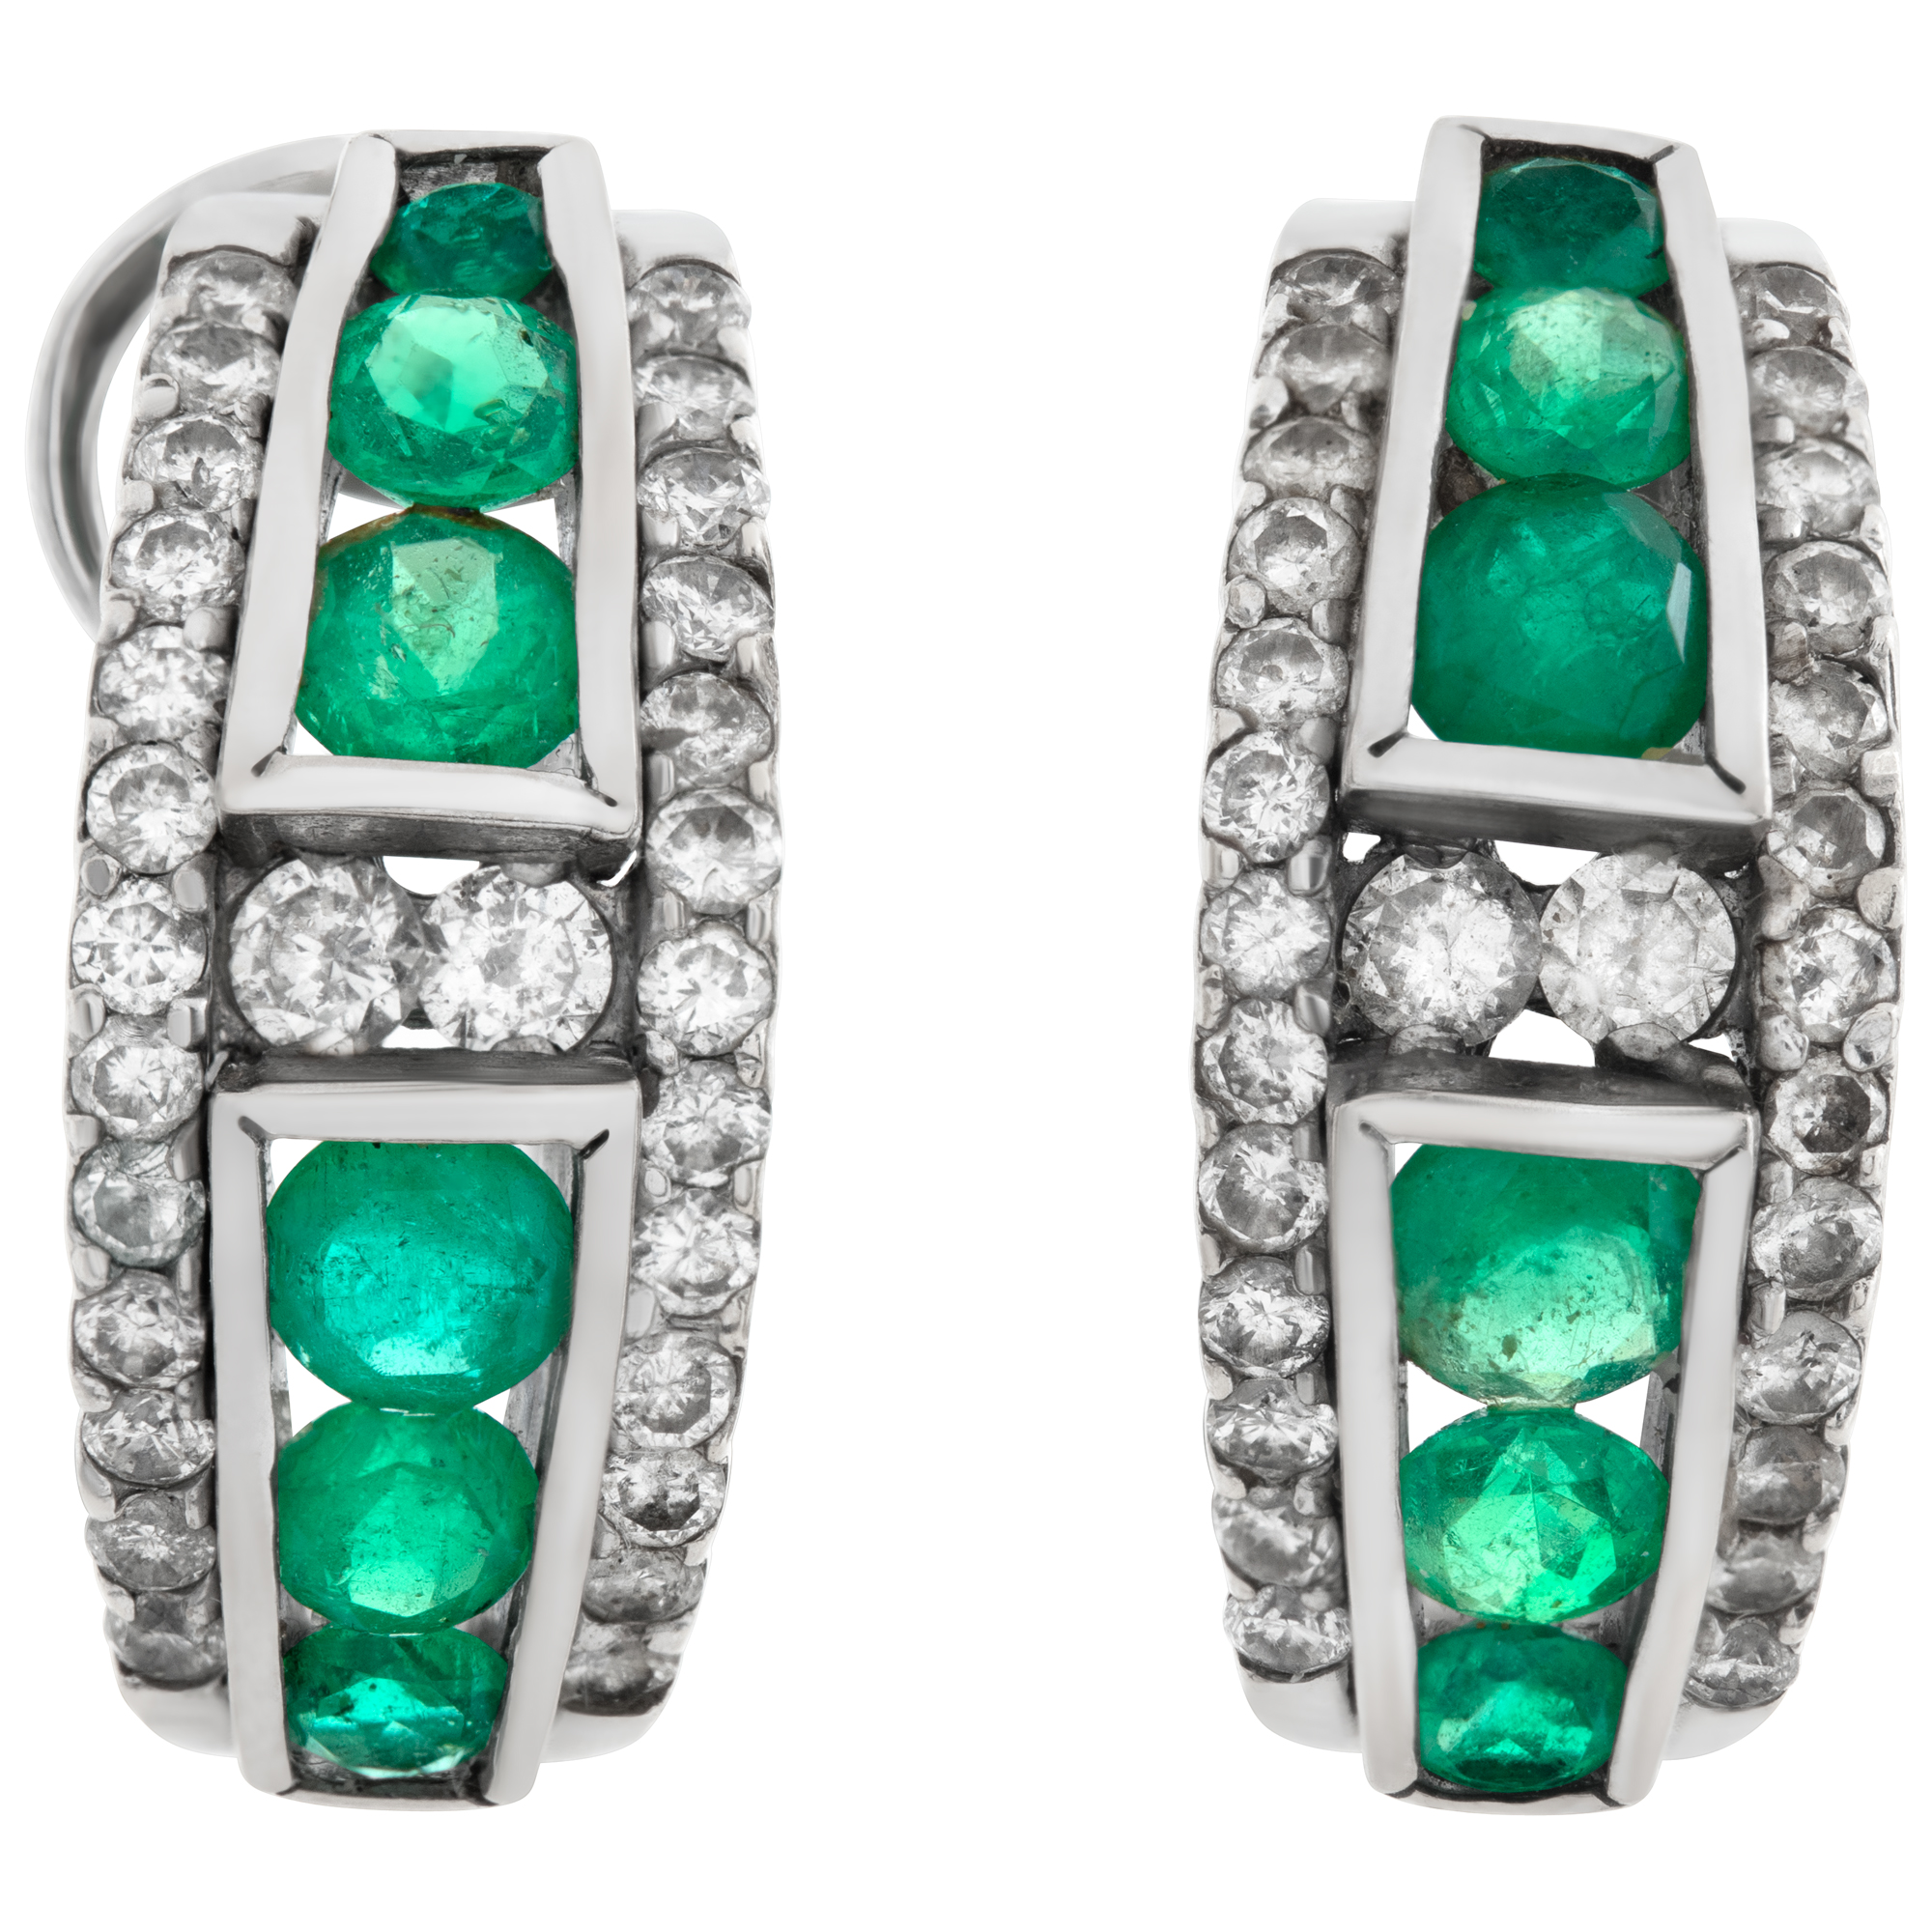 Diamond and Emerald huggie earrings in 18k white gold with omega clip backs